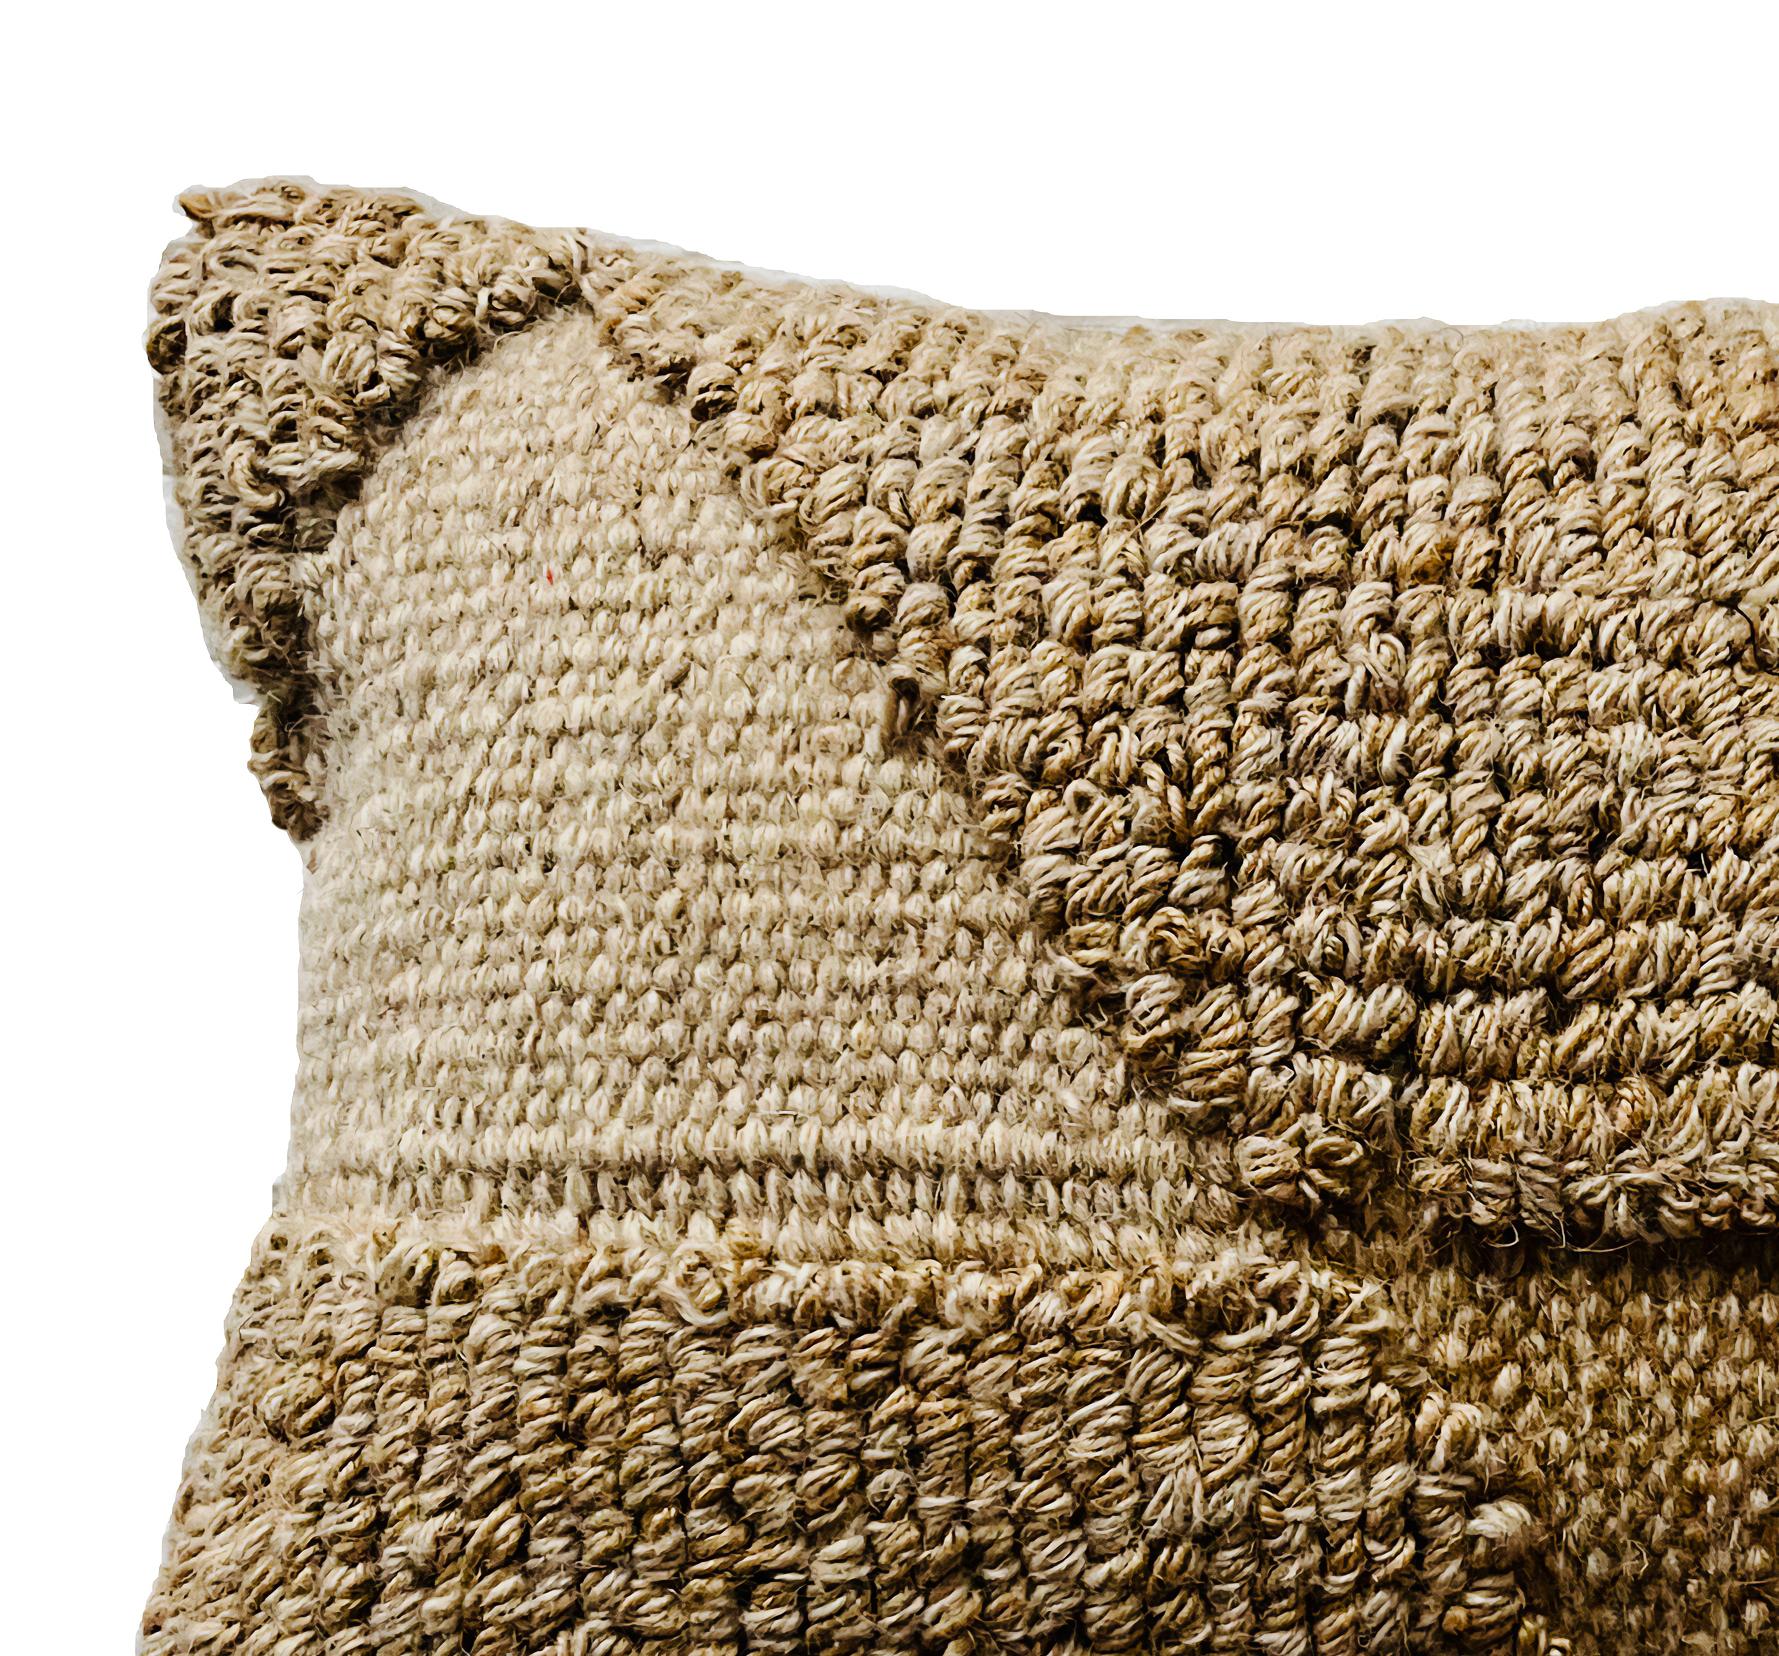 An abstract design collection from Anna Charlotte Atelier, flat and lopped weave 
in hand-spun wool and hemp yarn.

Design: PATCHWORK
Cushion cover. Handwoven wool, hemp on cotton warp
Size: 35 x 50 cm (ACA recommends inside cushion size 40x60